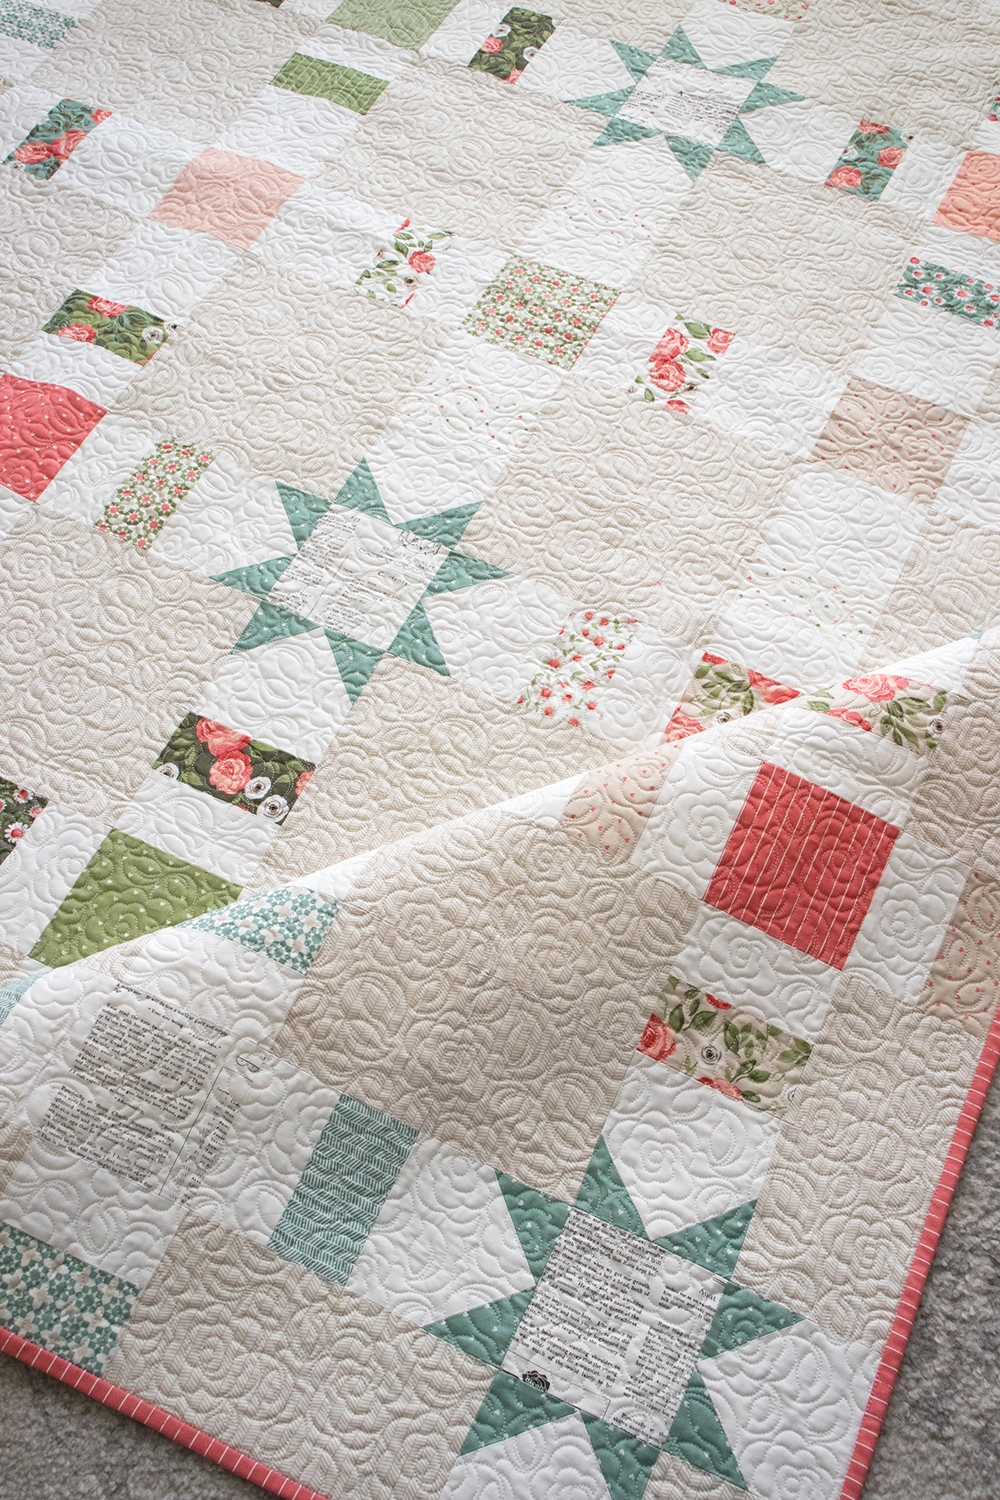 Pretty Please charm pack quilt by Lella Boutique. Beautiful and simple with a few sawtooth stars throughout. Fabric is Love Note by Lella Boutique for Moda Fabrics.